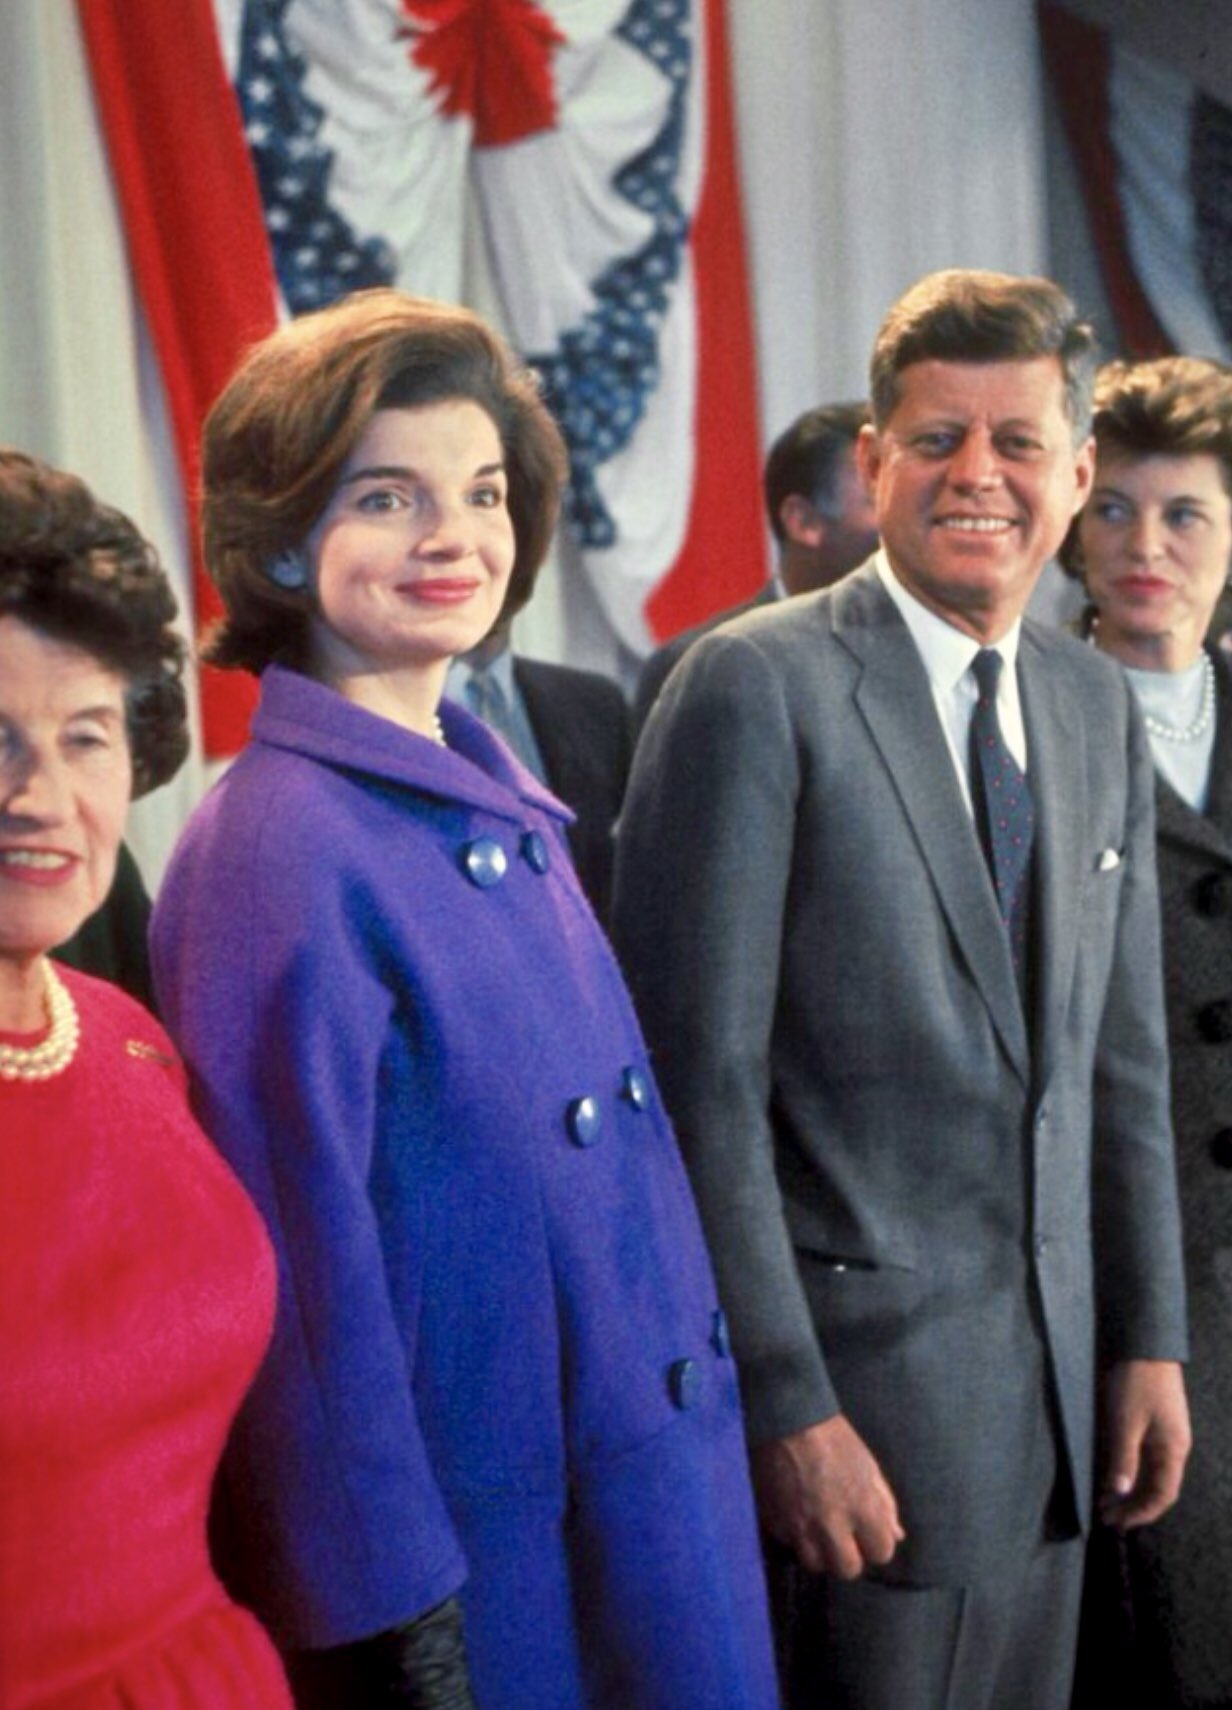 Image of JFK, Jackie Kennedy, and others.